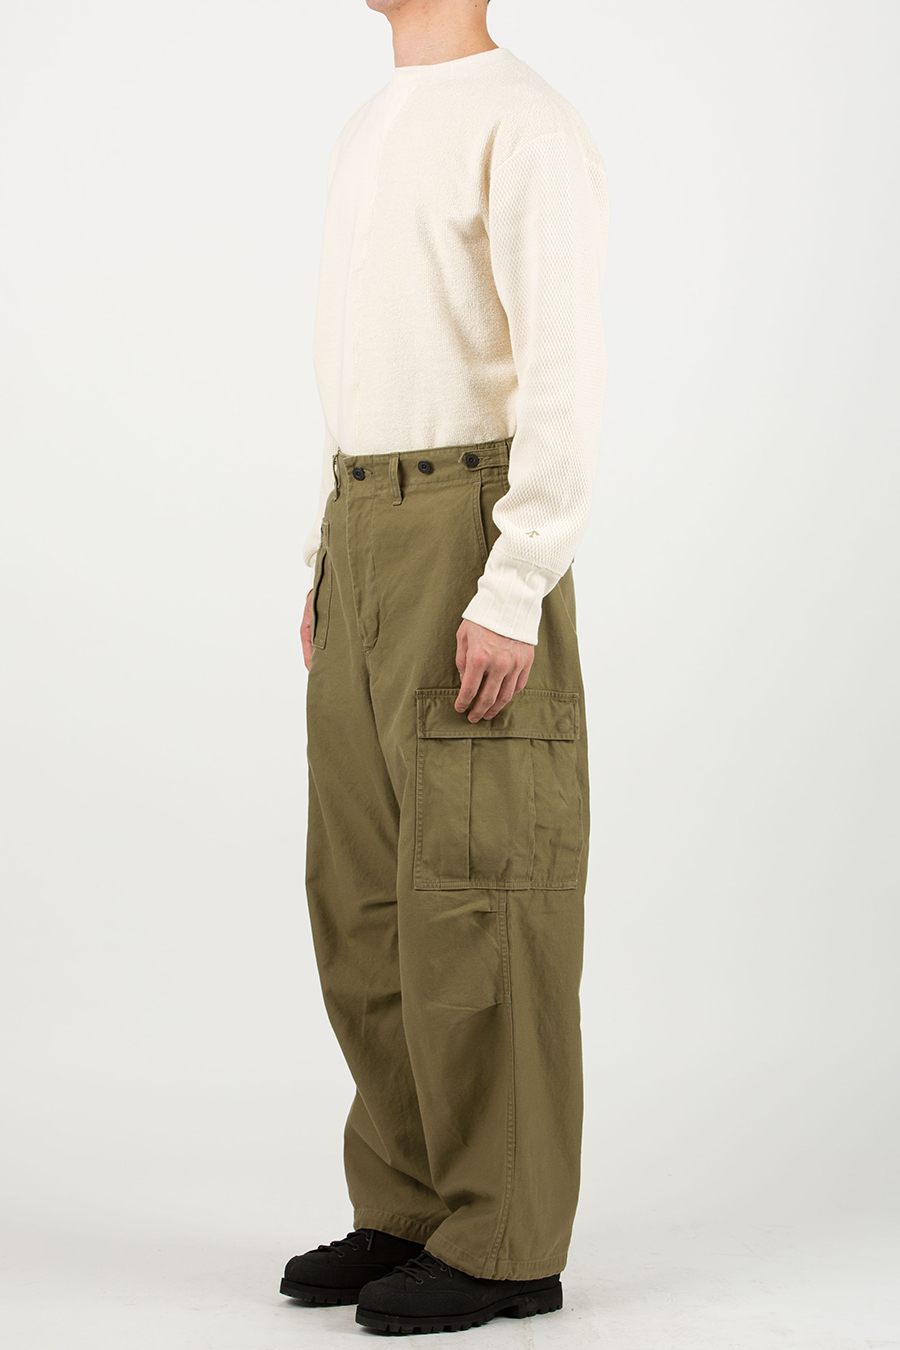 Nigel Cabourn ARMY CARGO PANT 23SSモデル - ワークパンツ